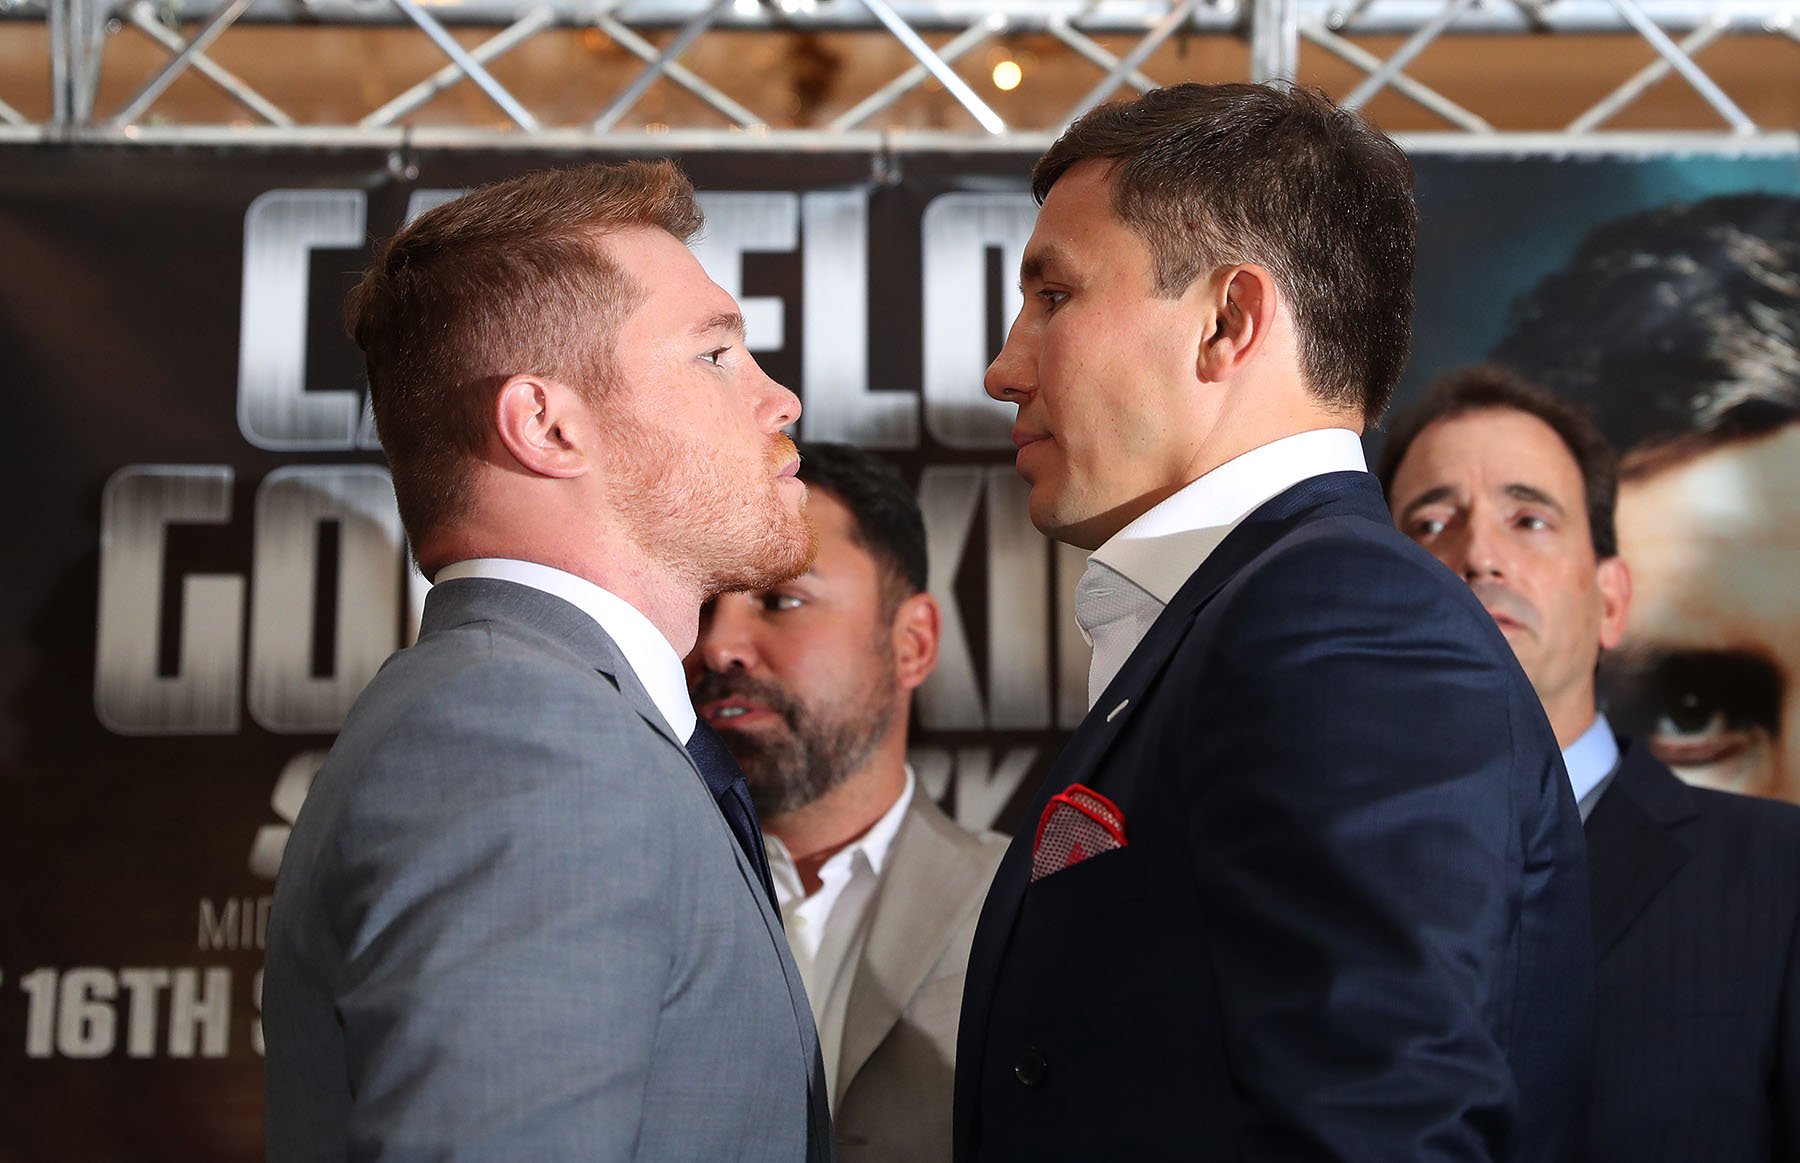 The world will freeze in September with the Golovkin-Canelo match